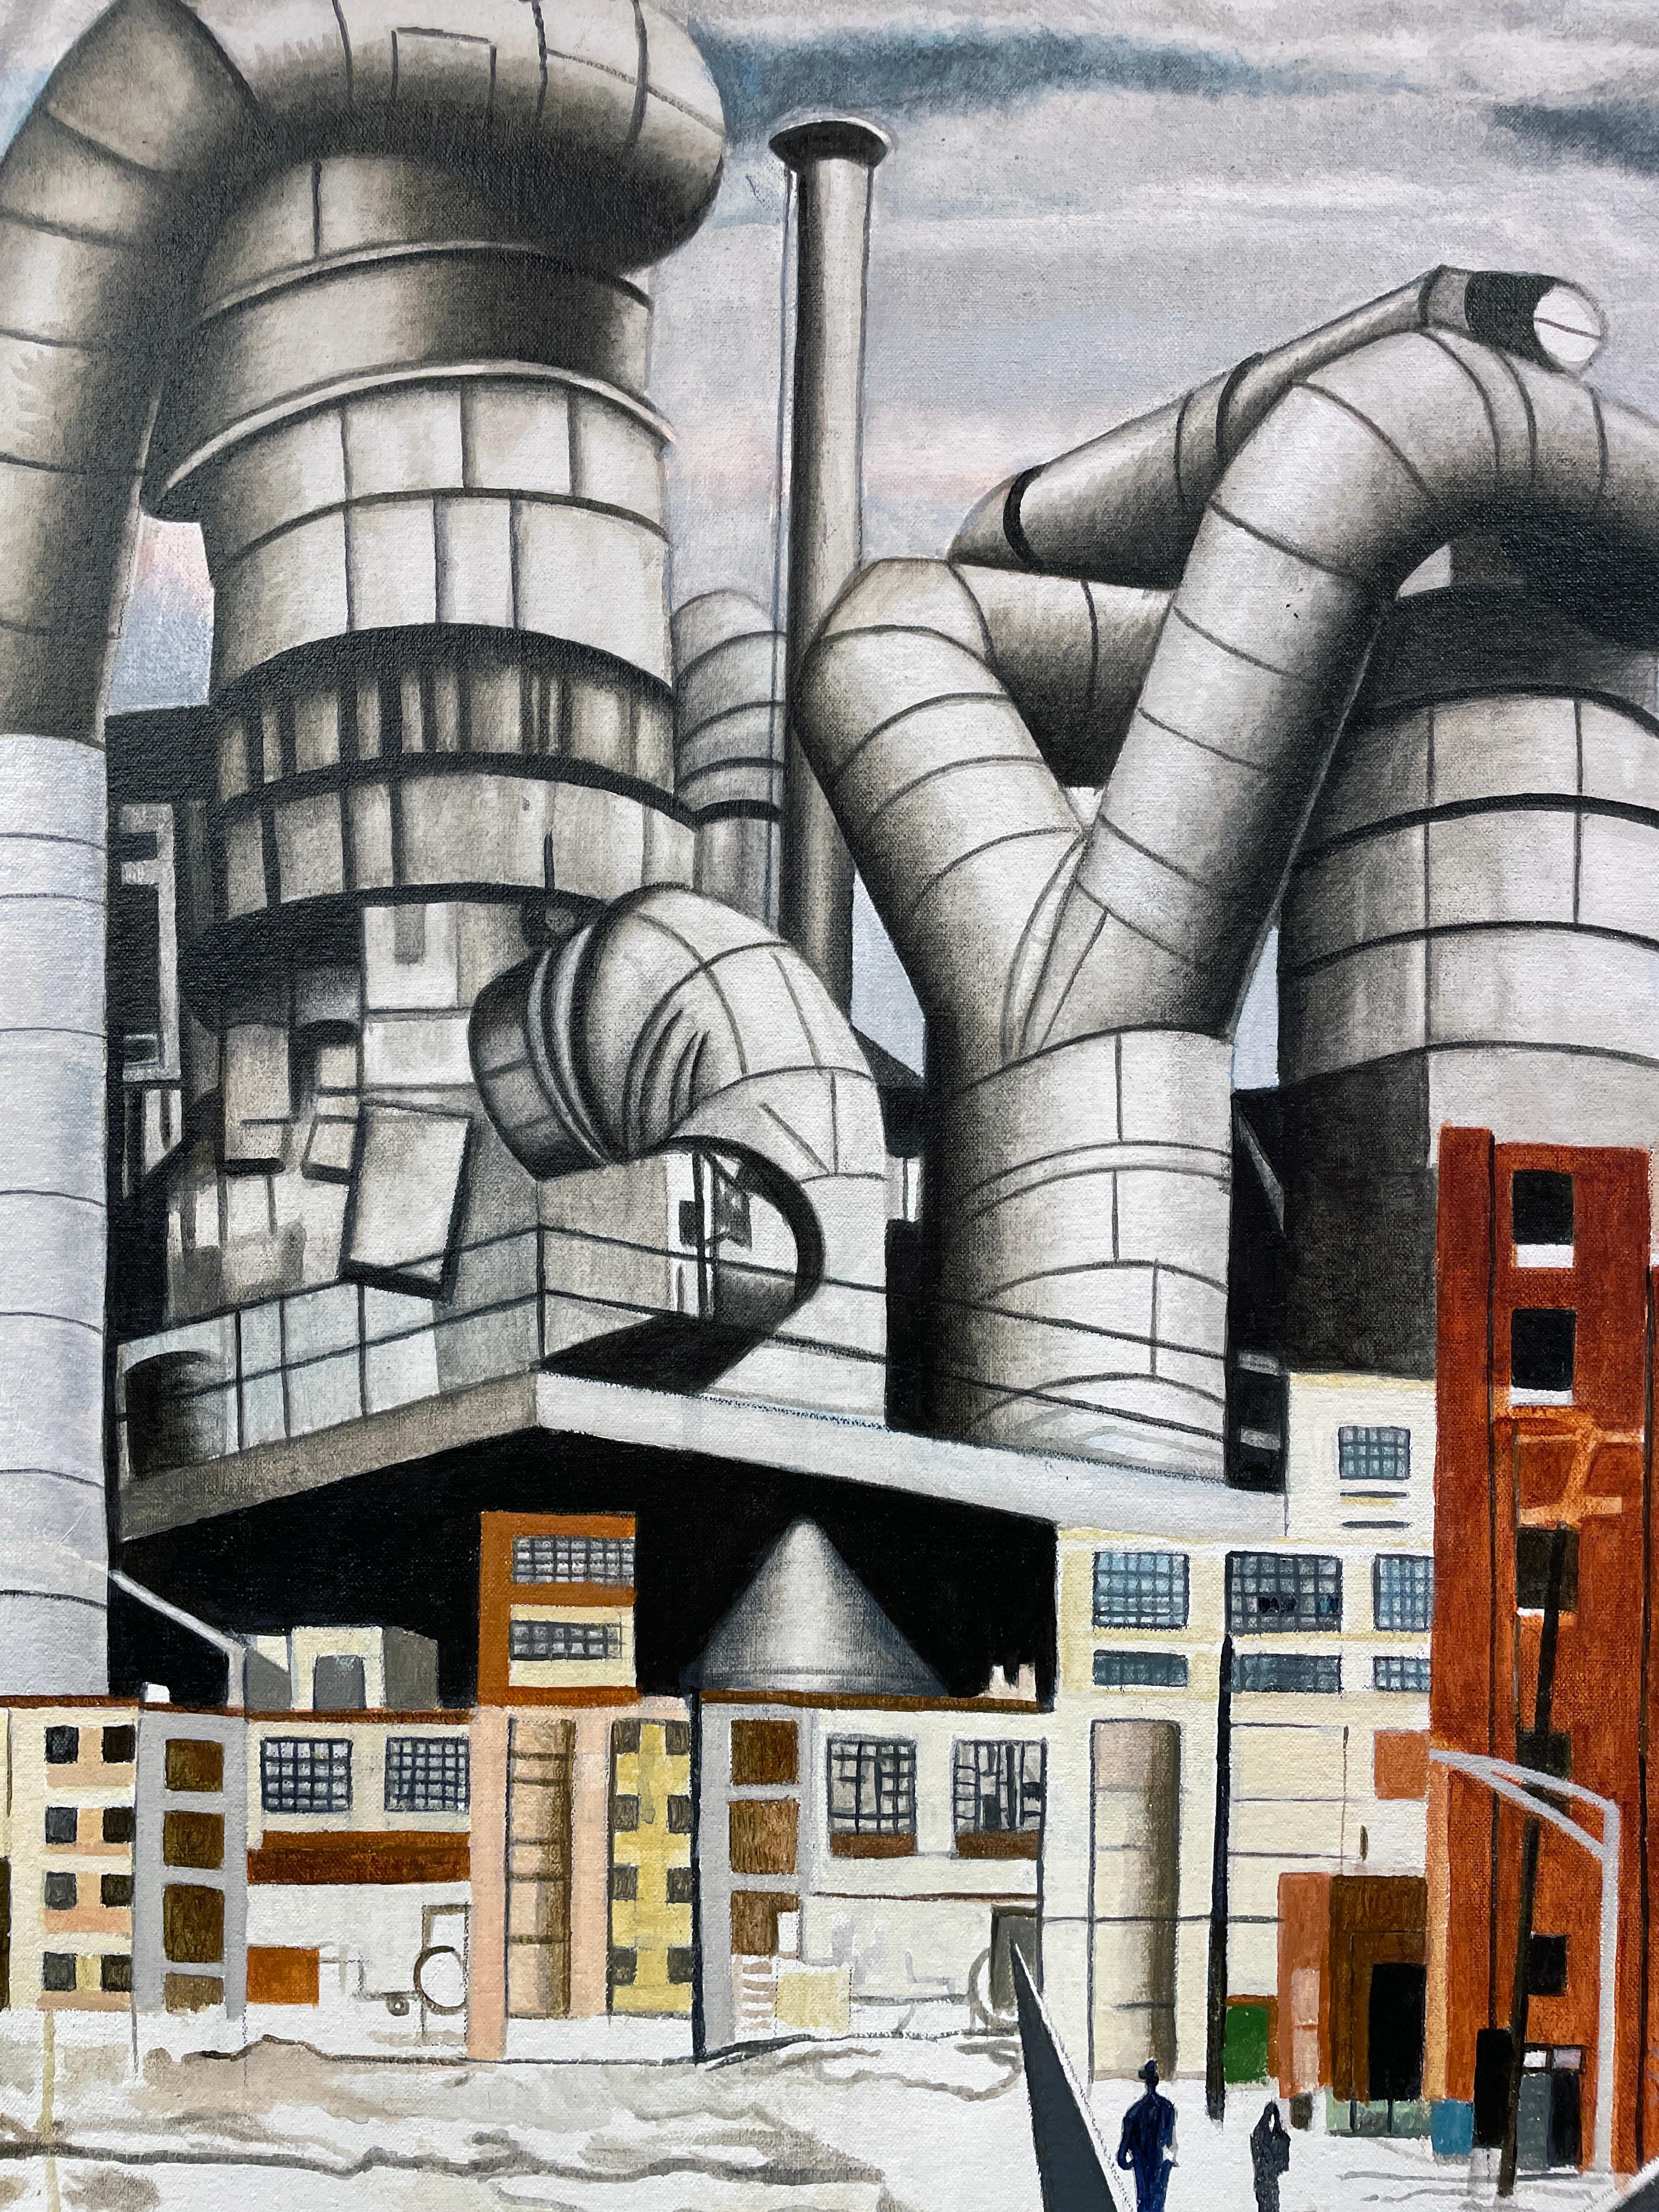 This large scale painting depicts the trials and tribulations of Chicago's Hispanic community the artist has been connected to his entire life.  The social realist/surrealist landscape depicts a Chicago factory at Canal and Cermak on Chicago's West